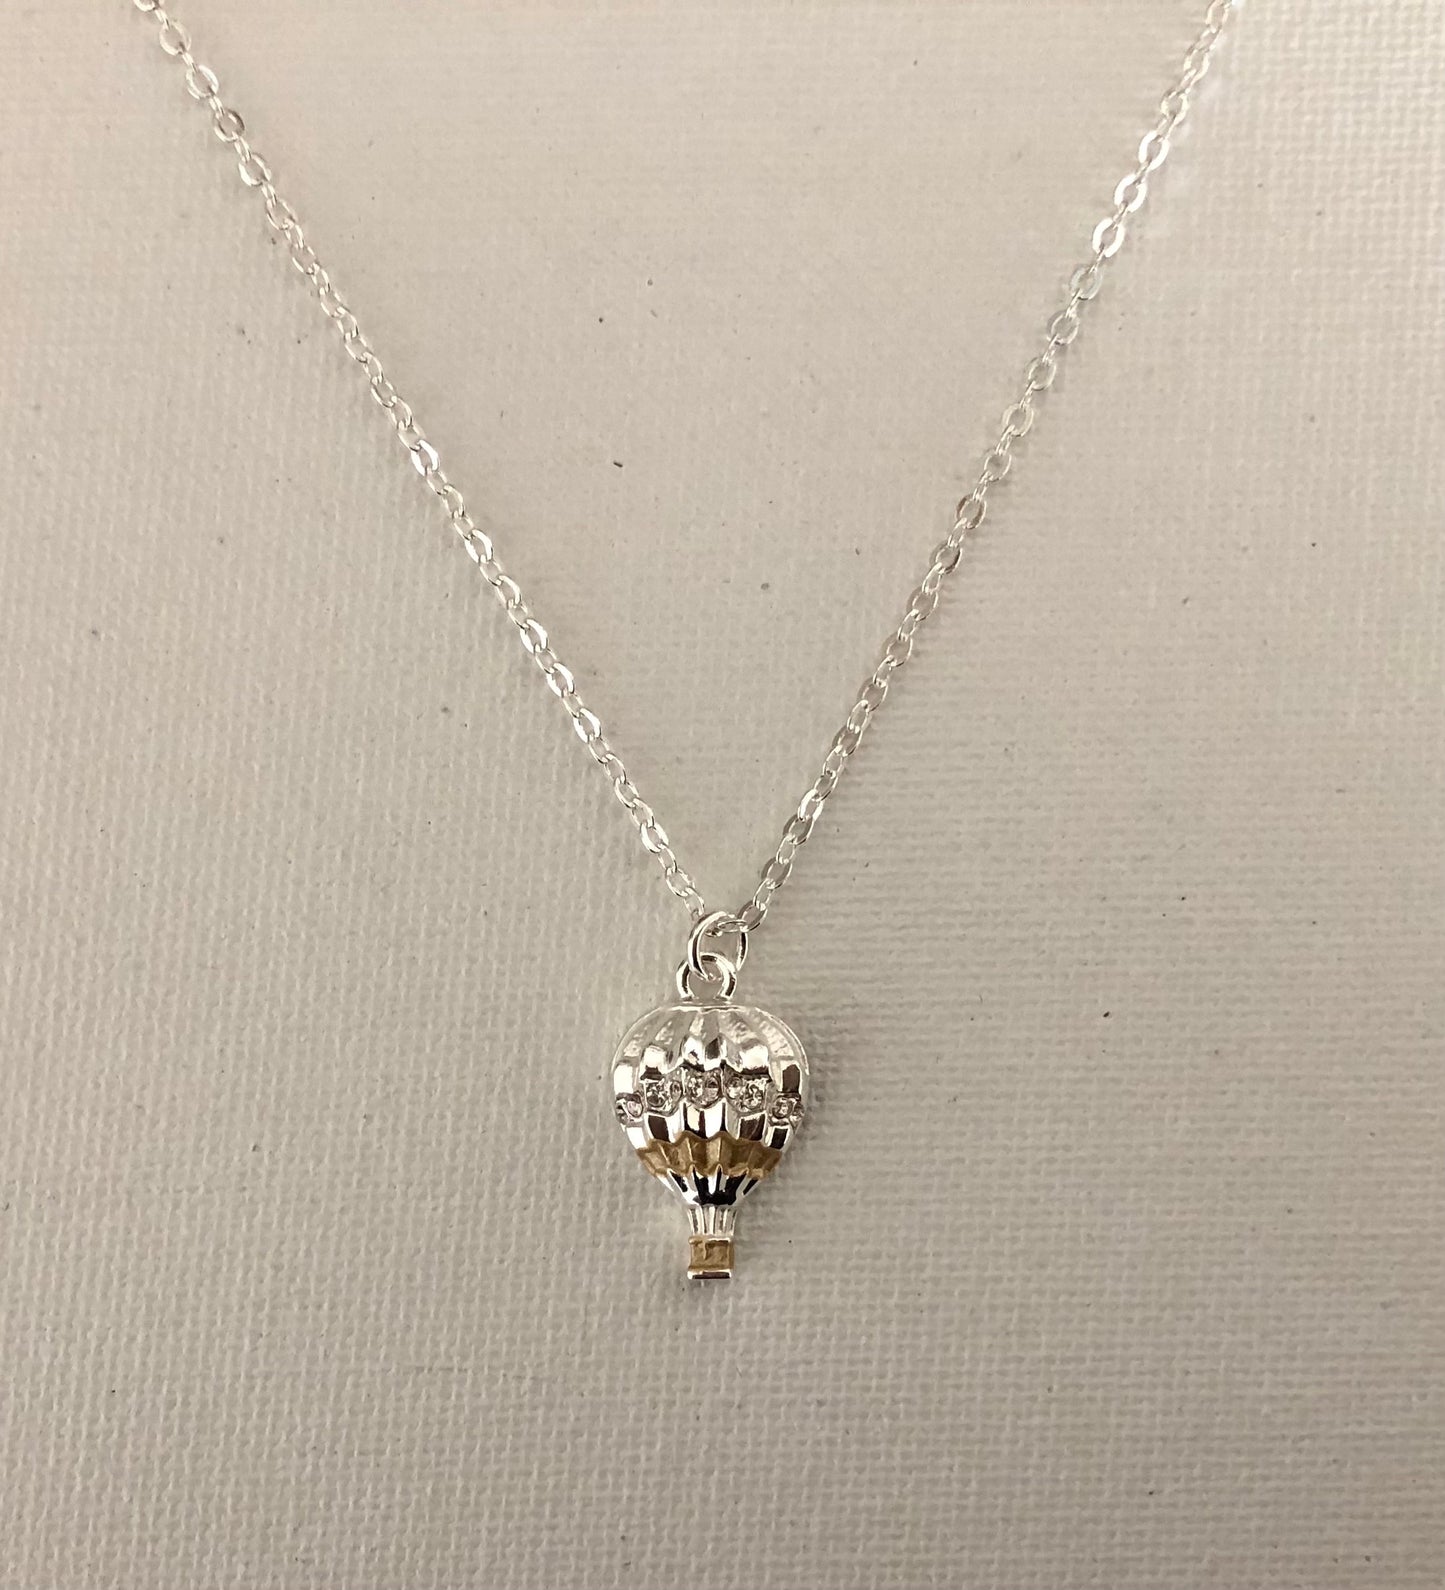 Hot Air Balloon CARDED Necklace